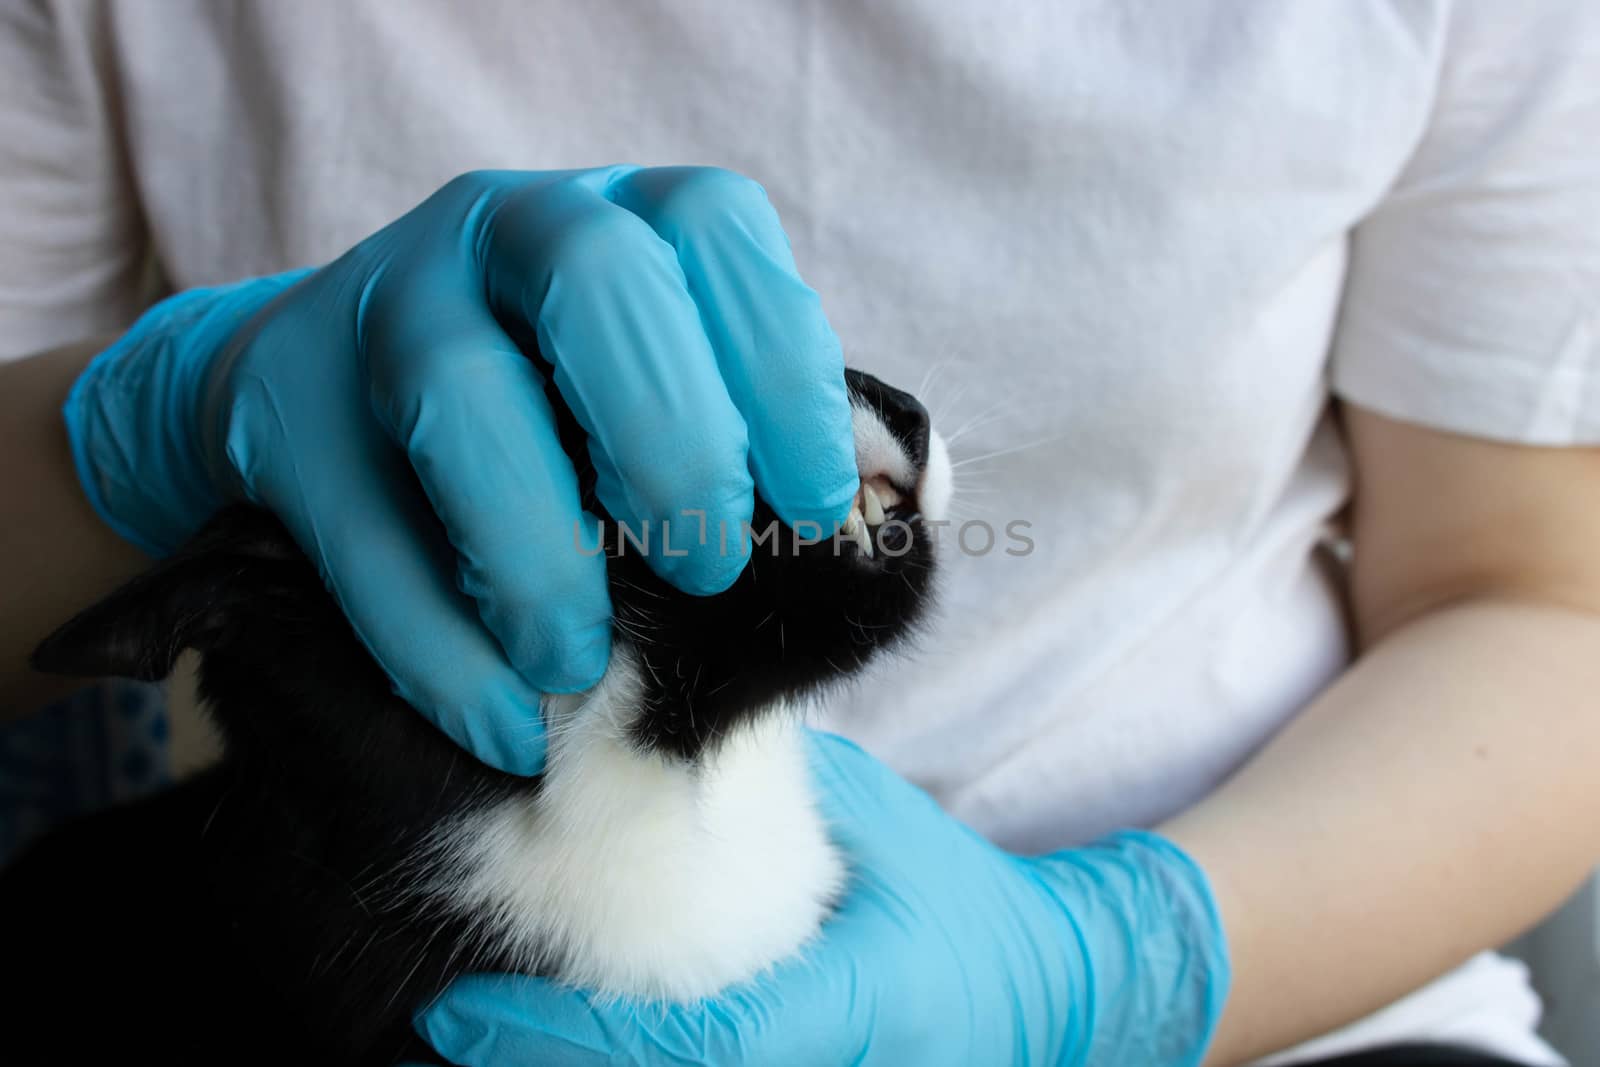 A veterinarian examines a black cat's teeth at the clinic